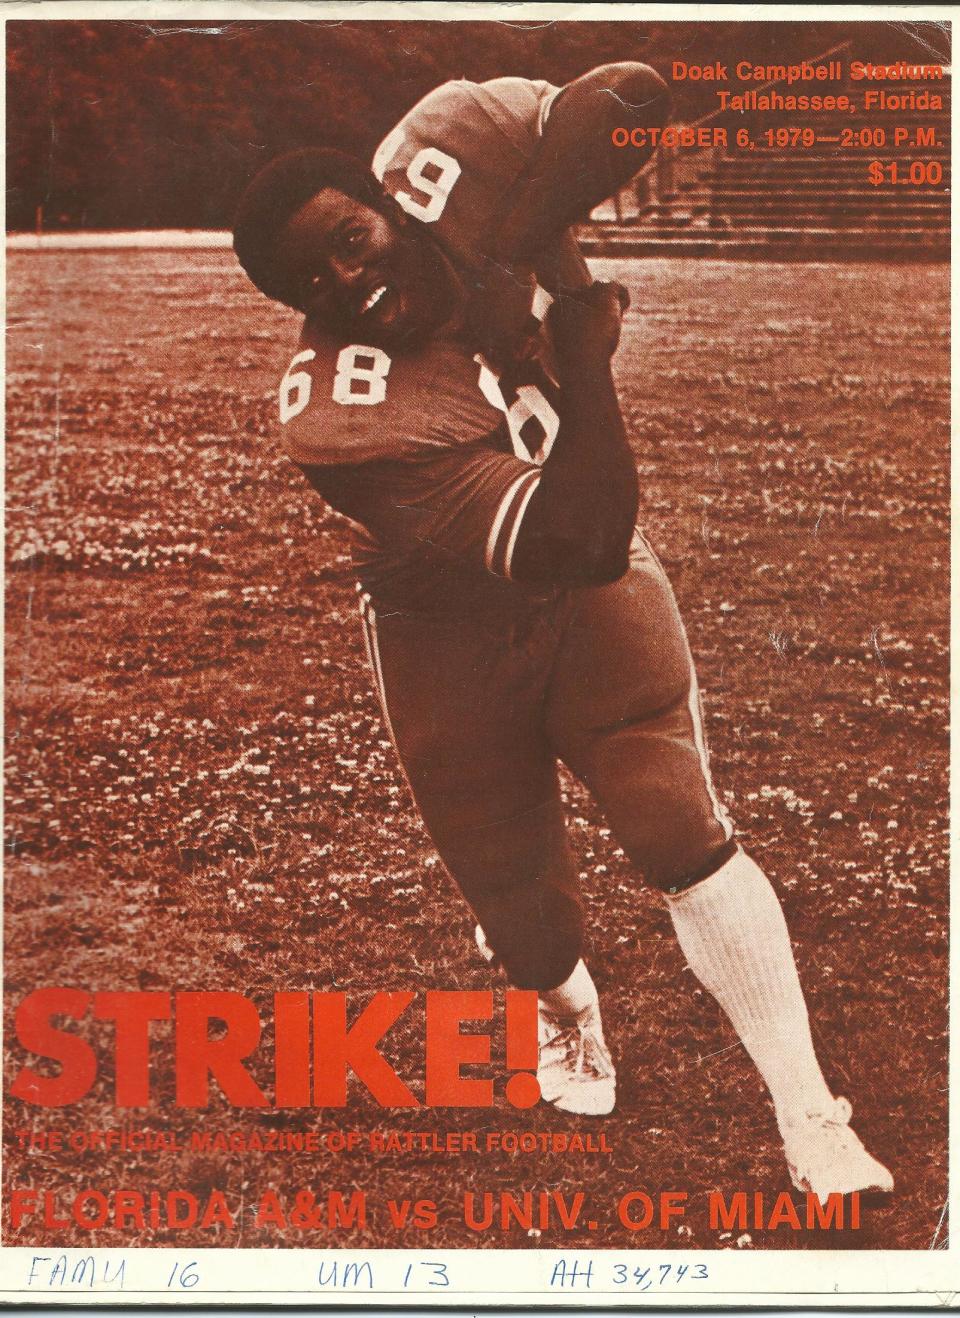 Florida A&M University offensive lineman Tyrone McGriff on the cover of the 1979 FAMU vs. Miami edition of 'STRIKE!' magazine